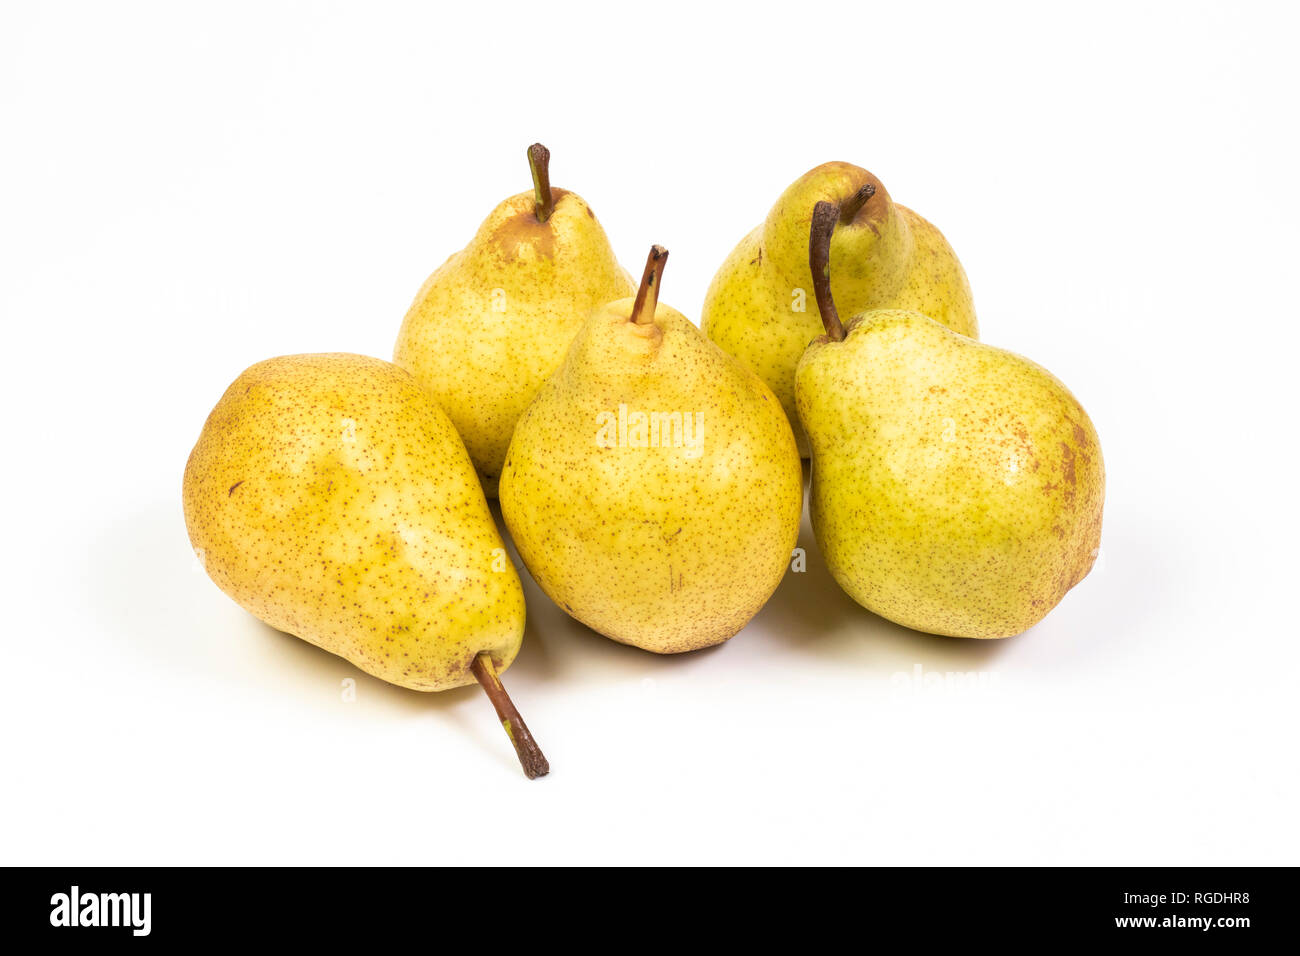 pears abate on white background Stock Photo